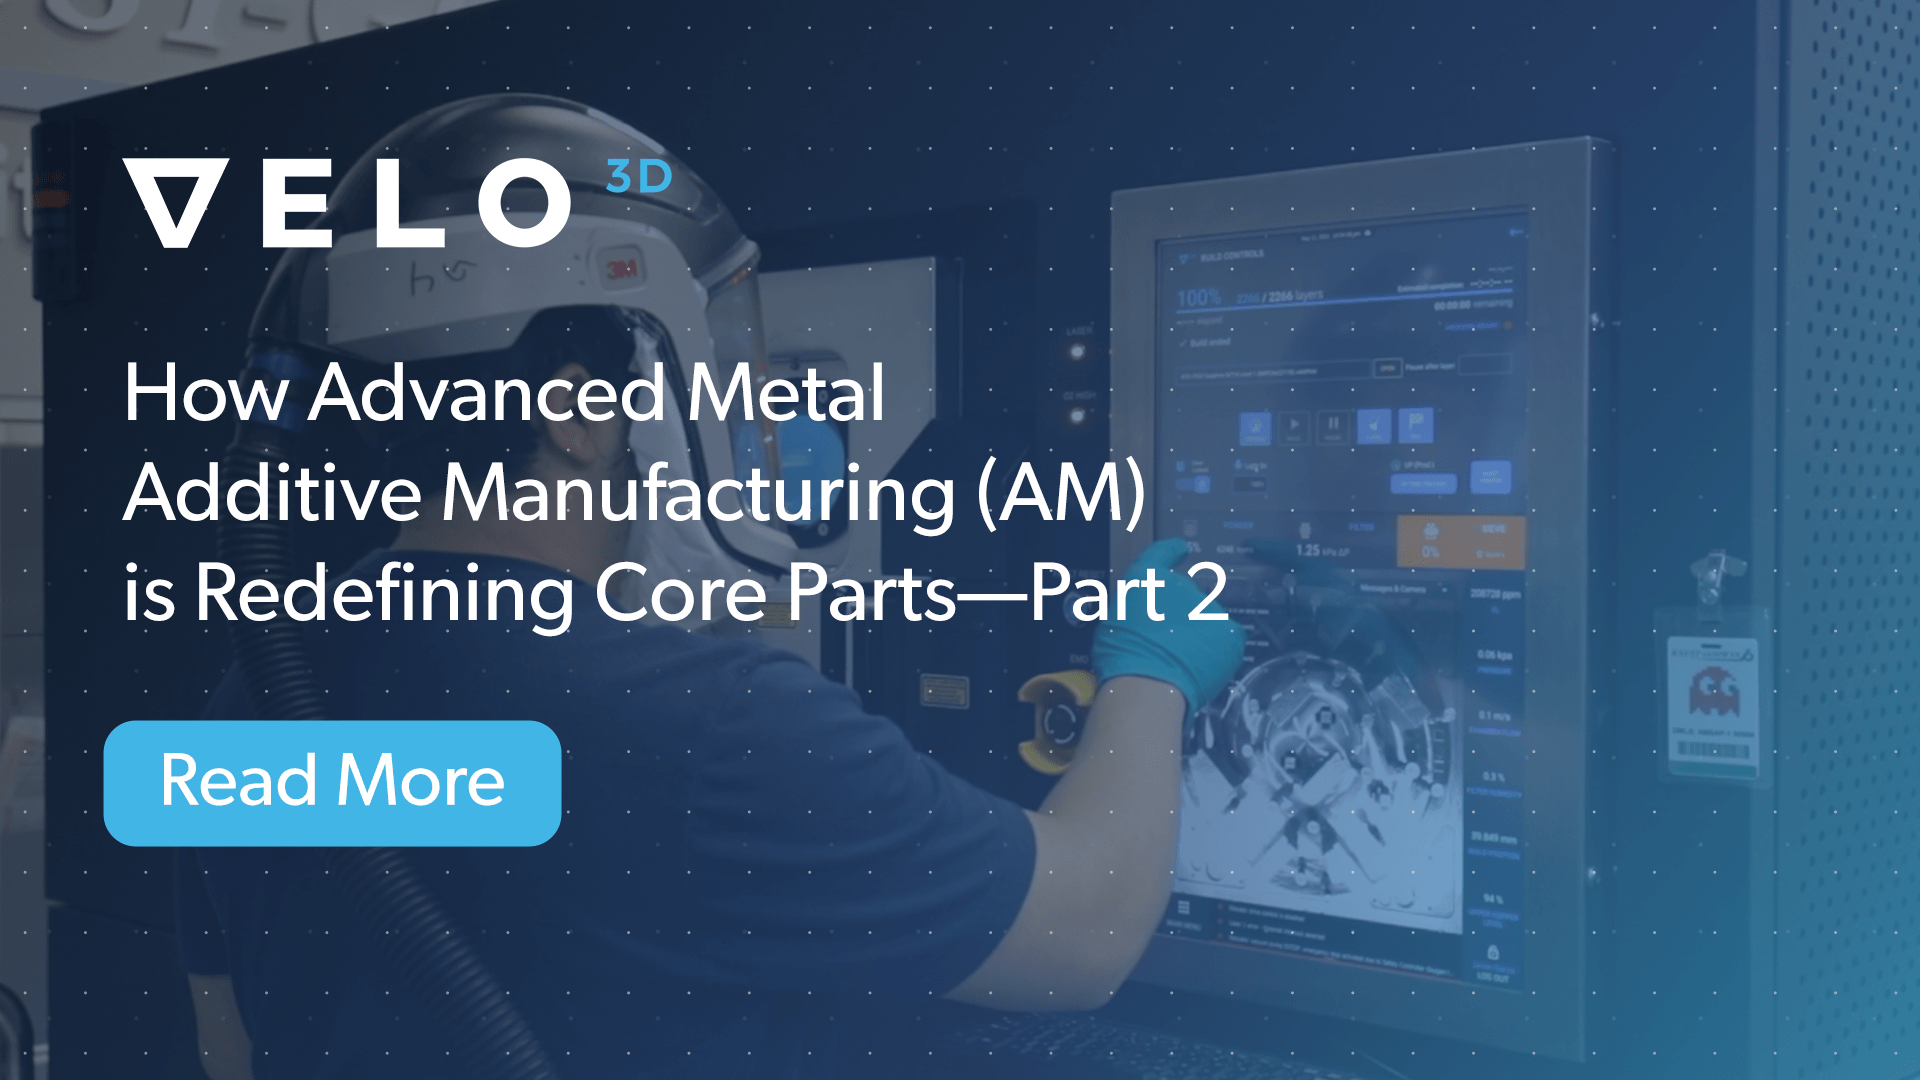 How Advanced Metal Additive Manufacturing (AM) is Redefining Core Parts—Part 2